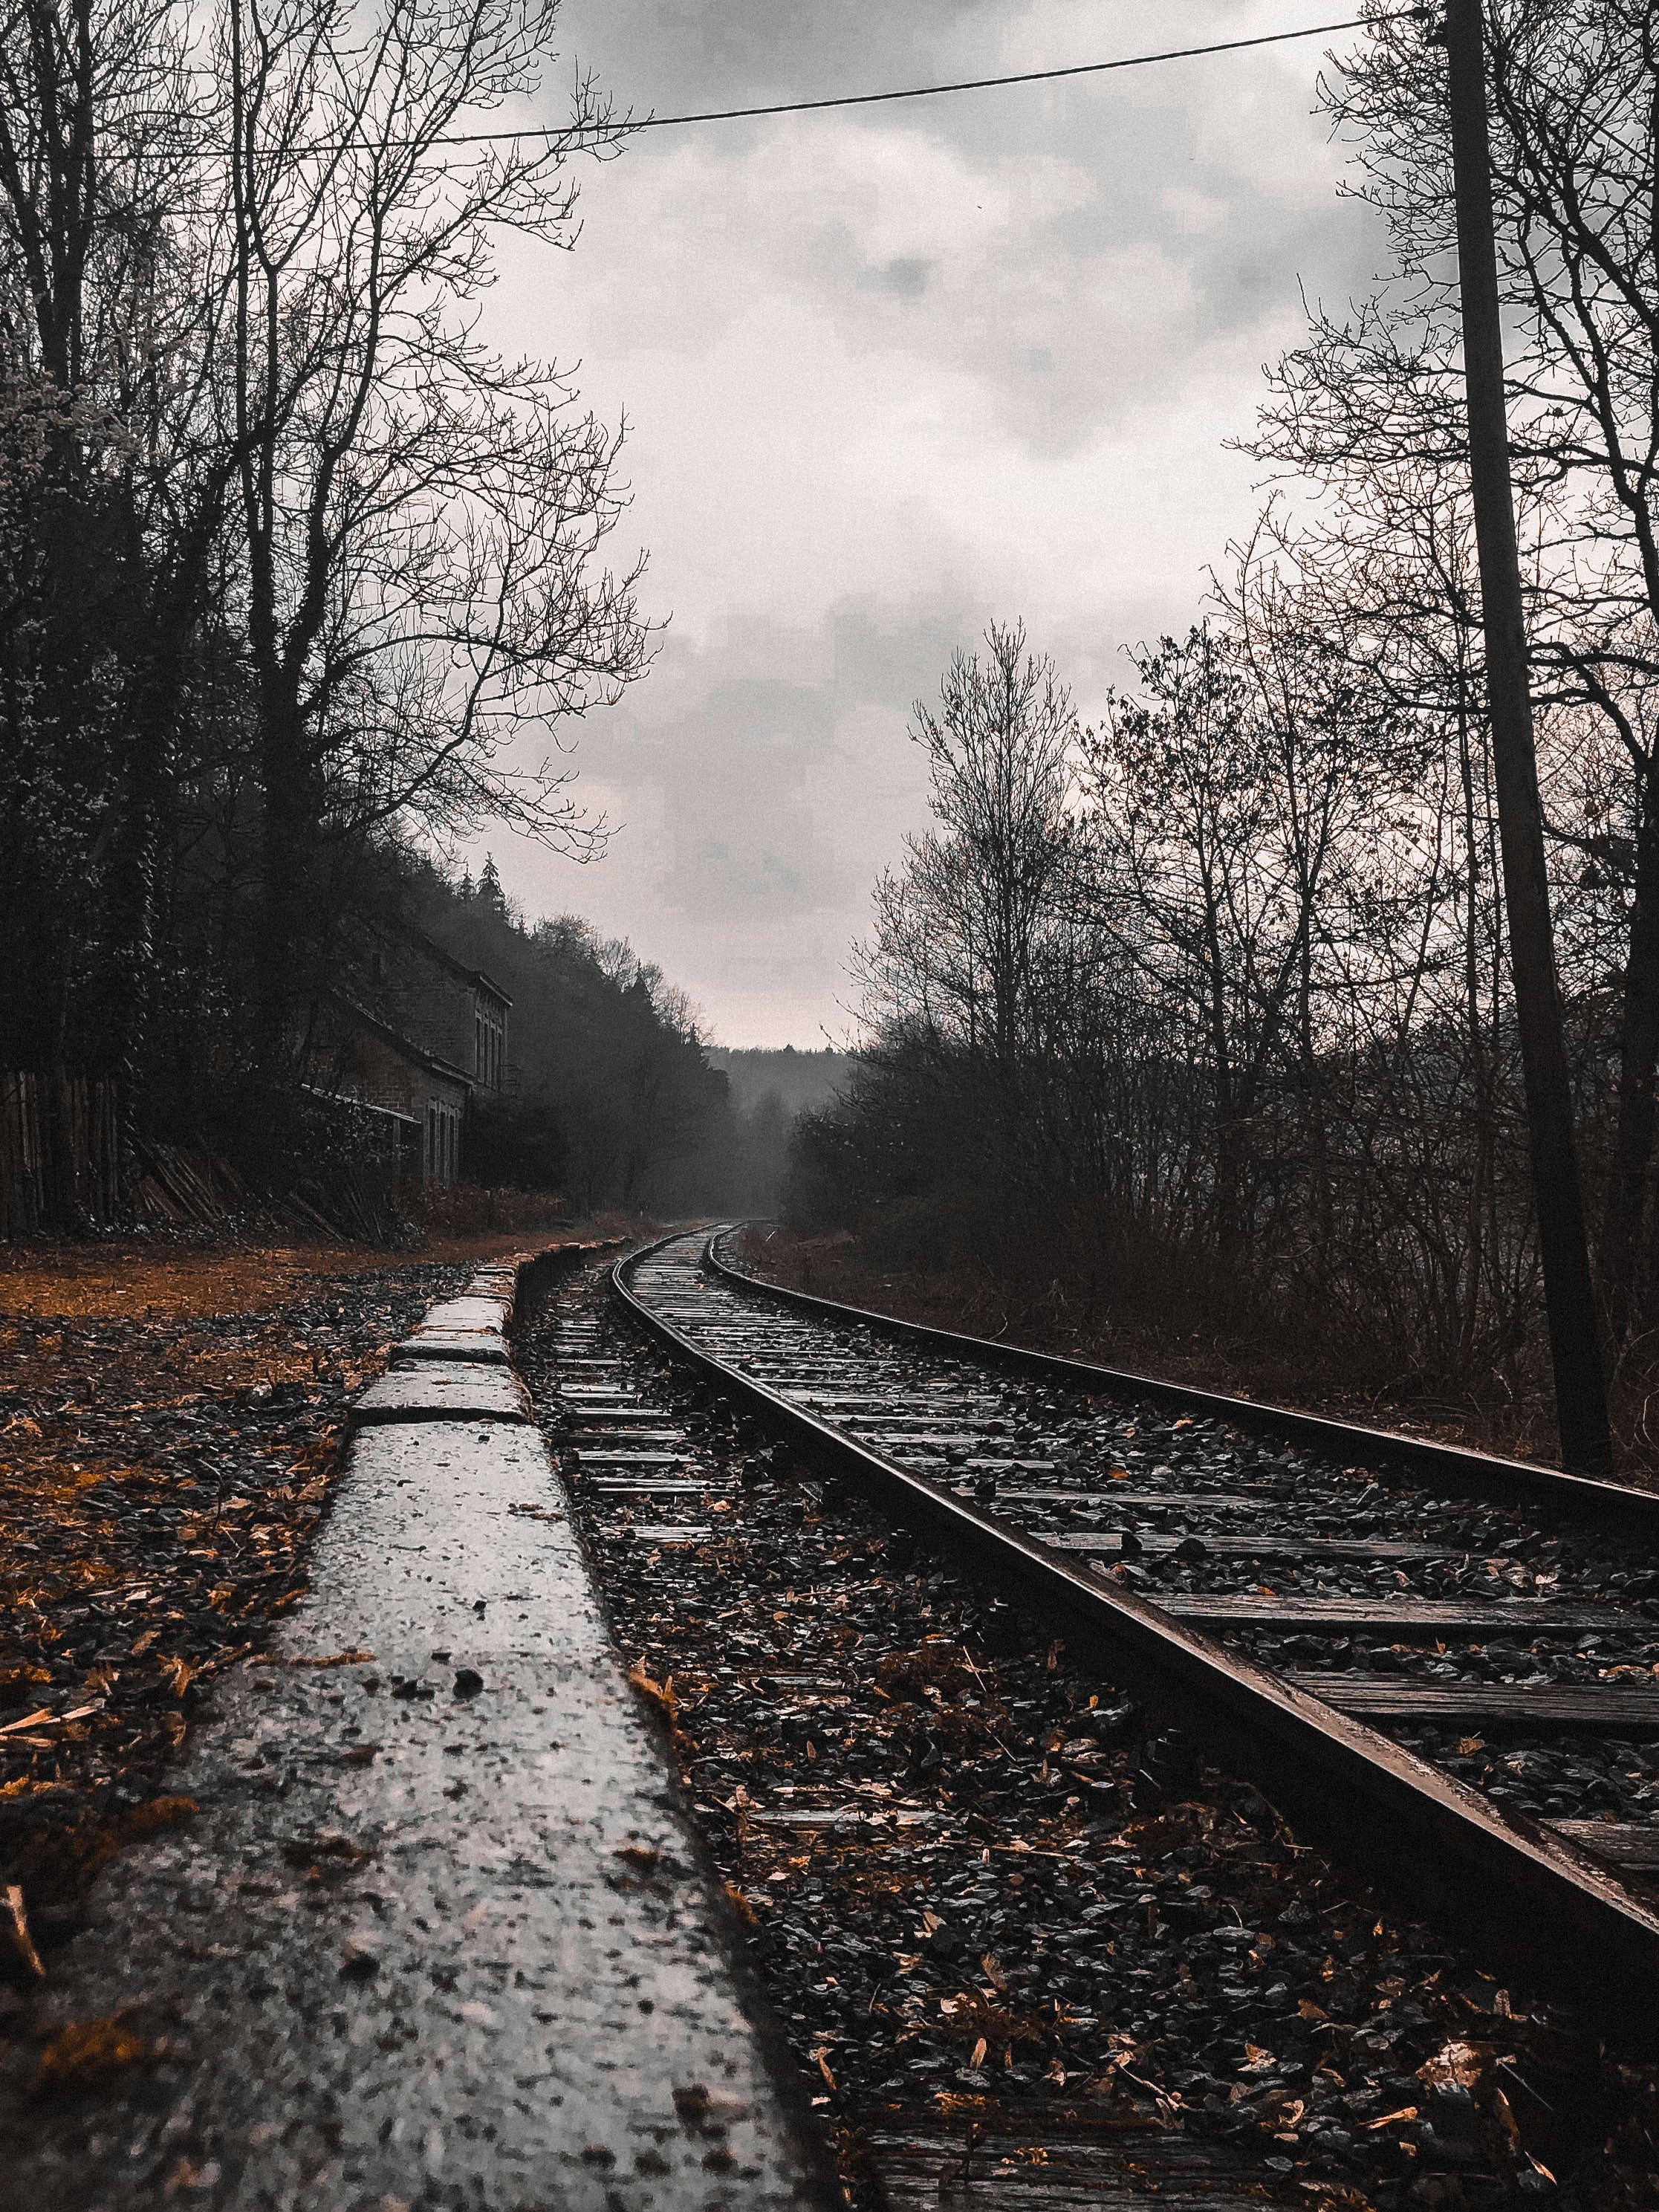 mainly cloudy, nature, rails, forest, overcast, railway